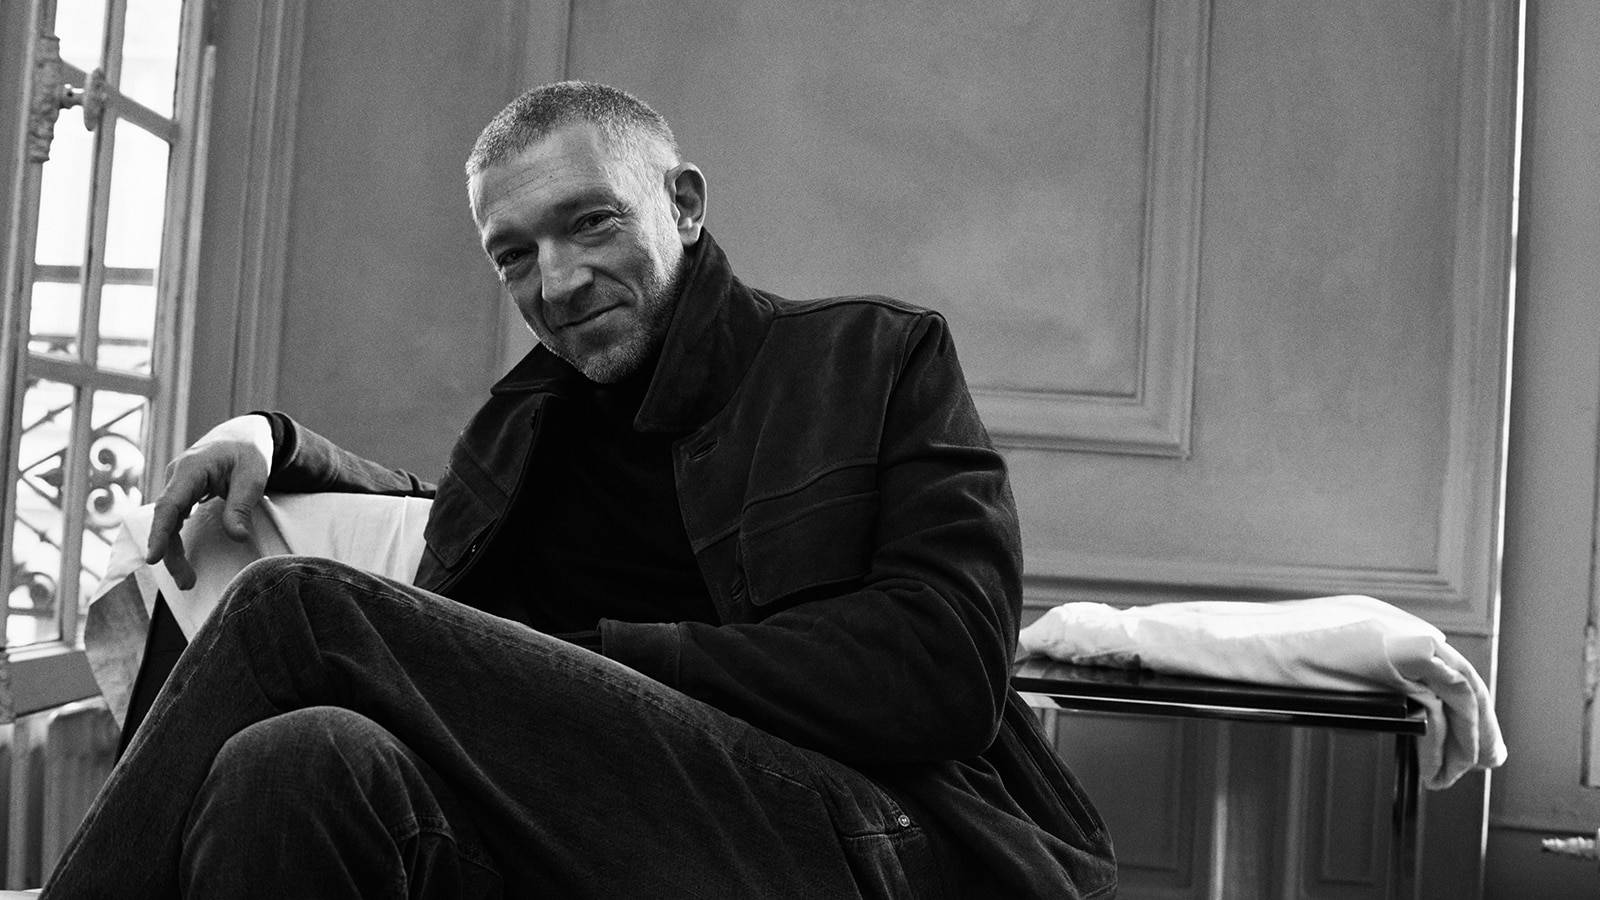 Charismatic Vincent Cassel Seated in Greyscale Photograph Wallpaper